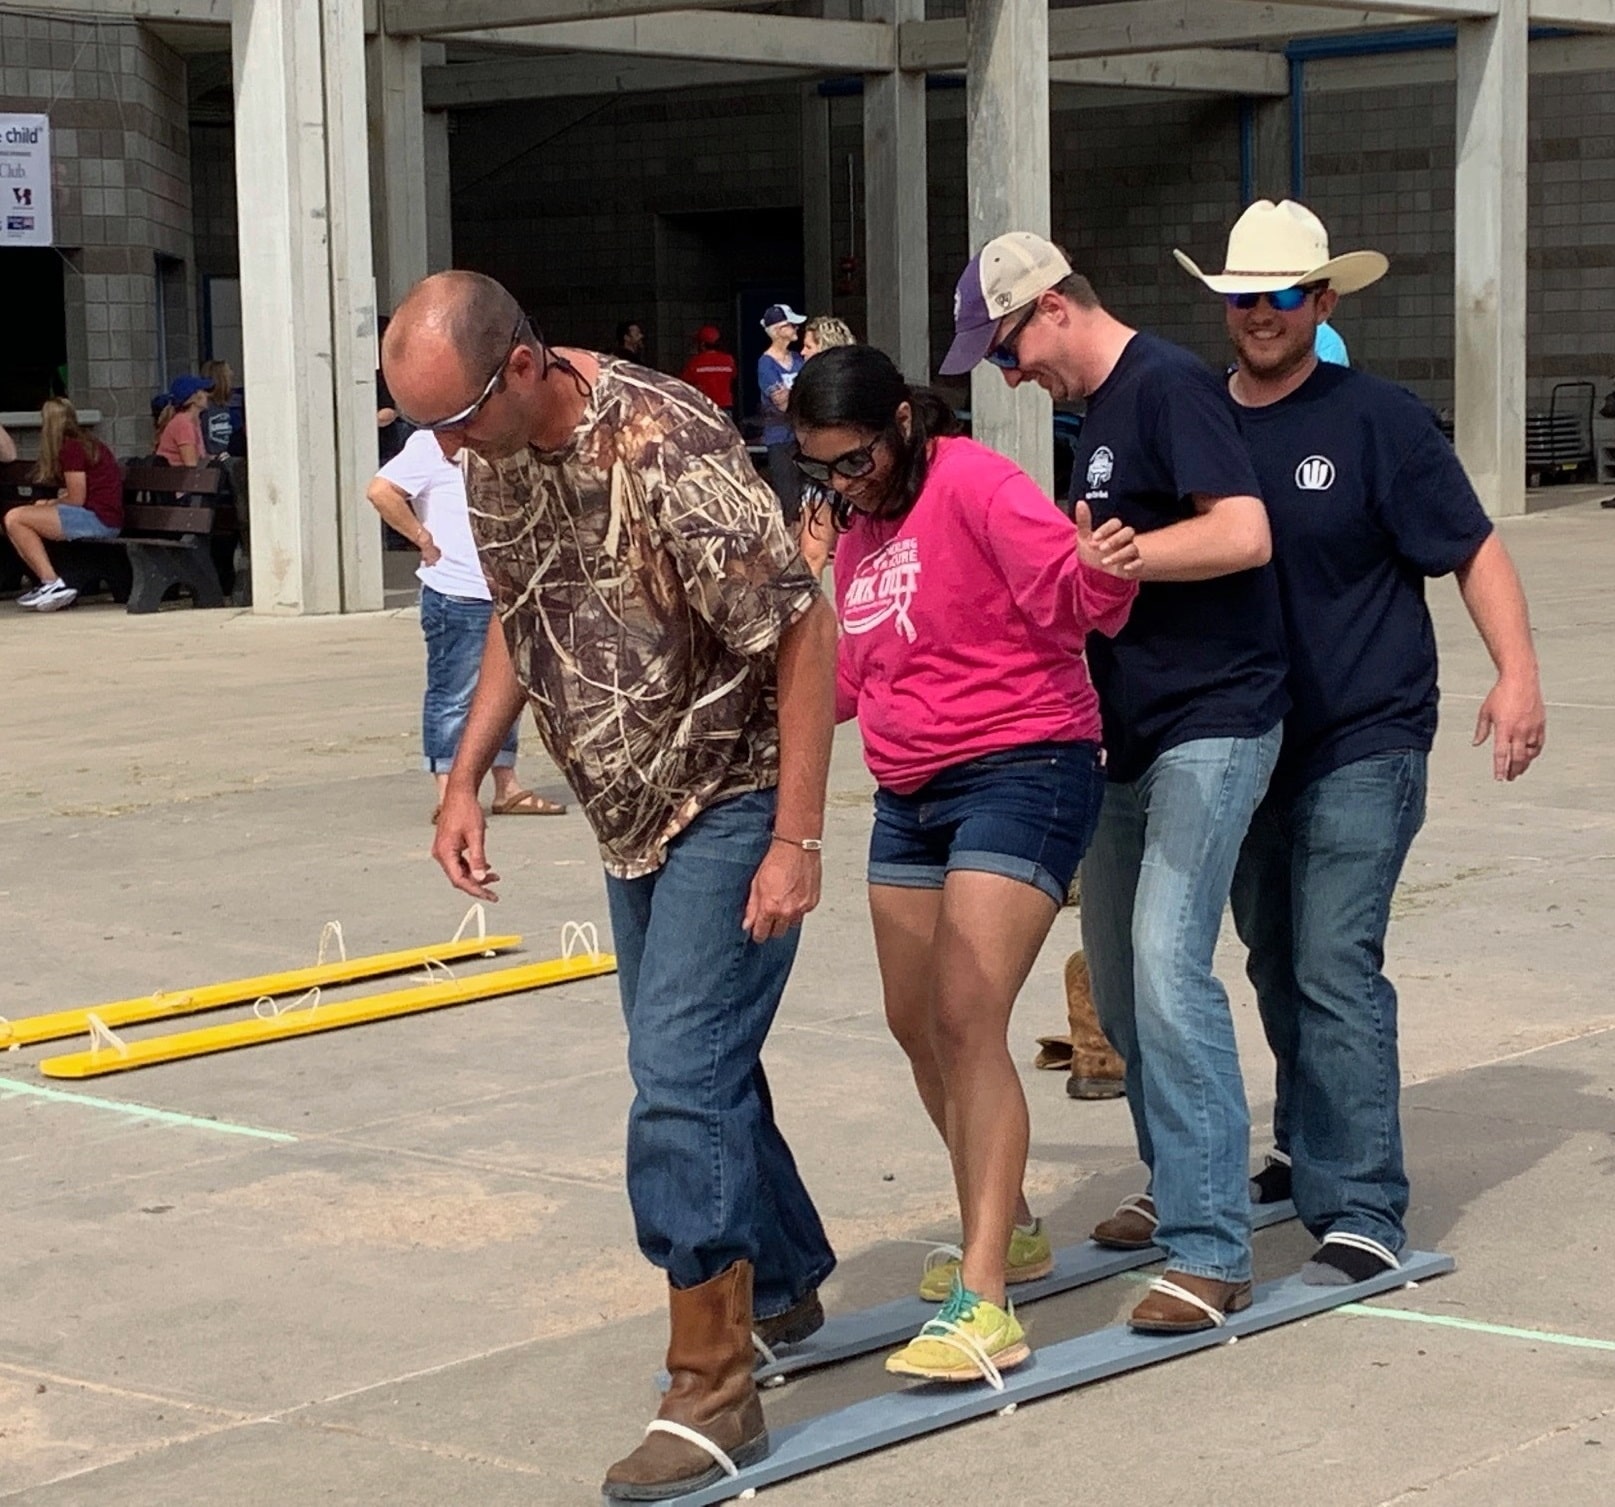 Garden City staff participating in Rodeo Olympics